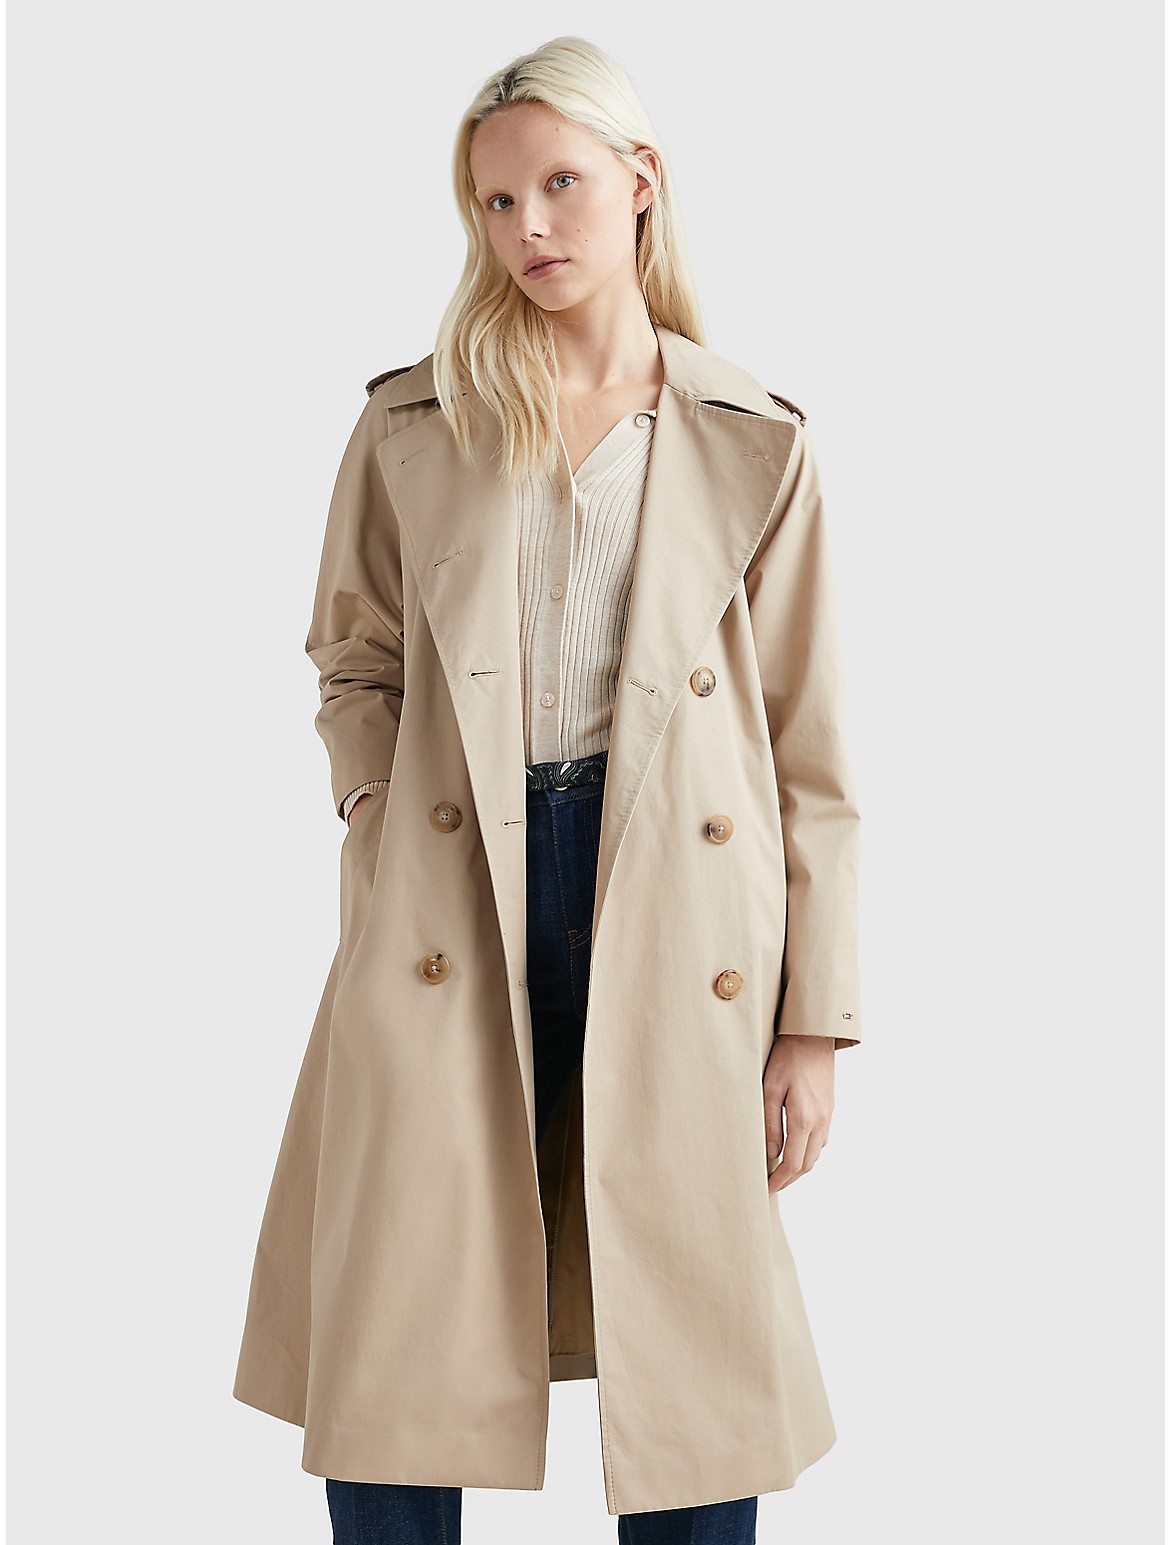 Tommy Hilfiger Women's Solid Double-Breasted Trench Coat